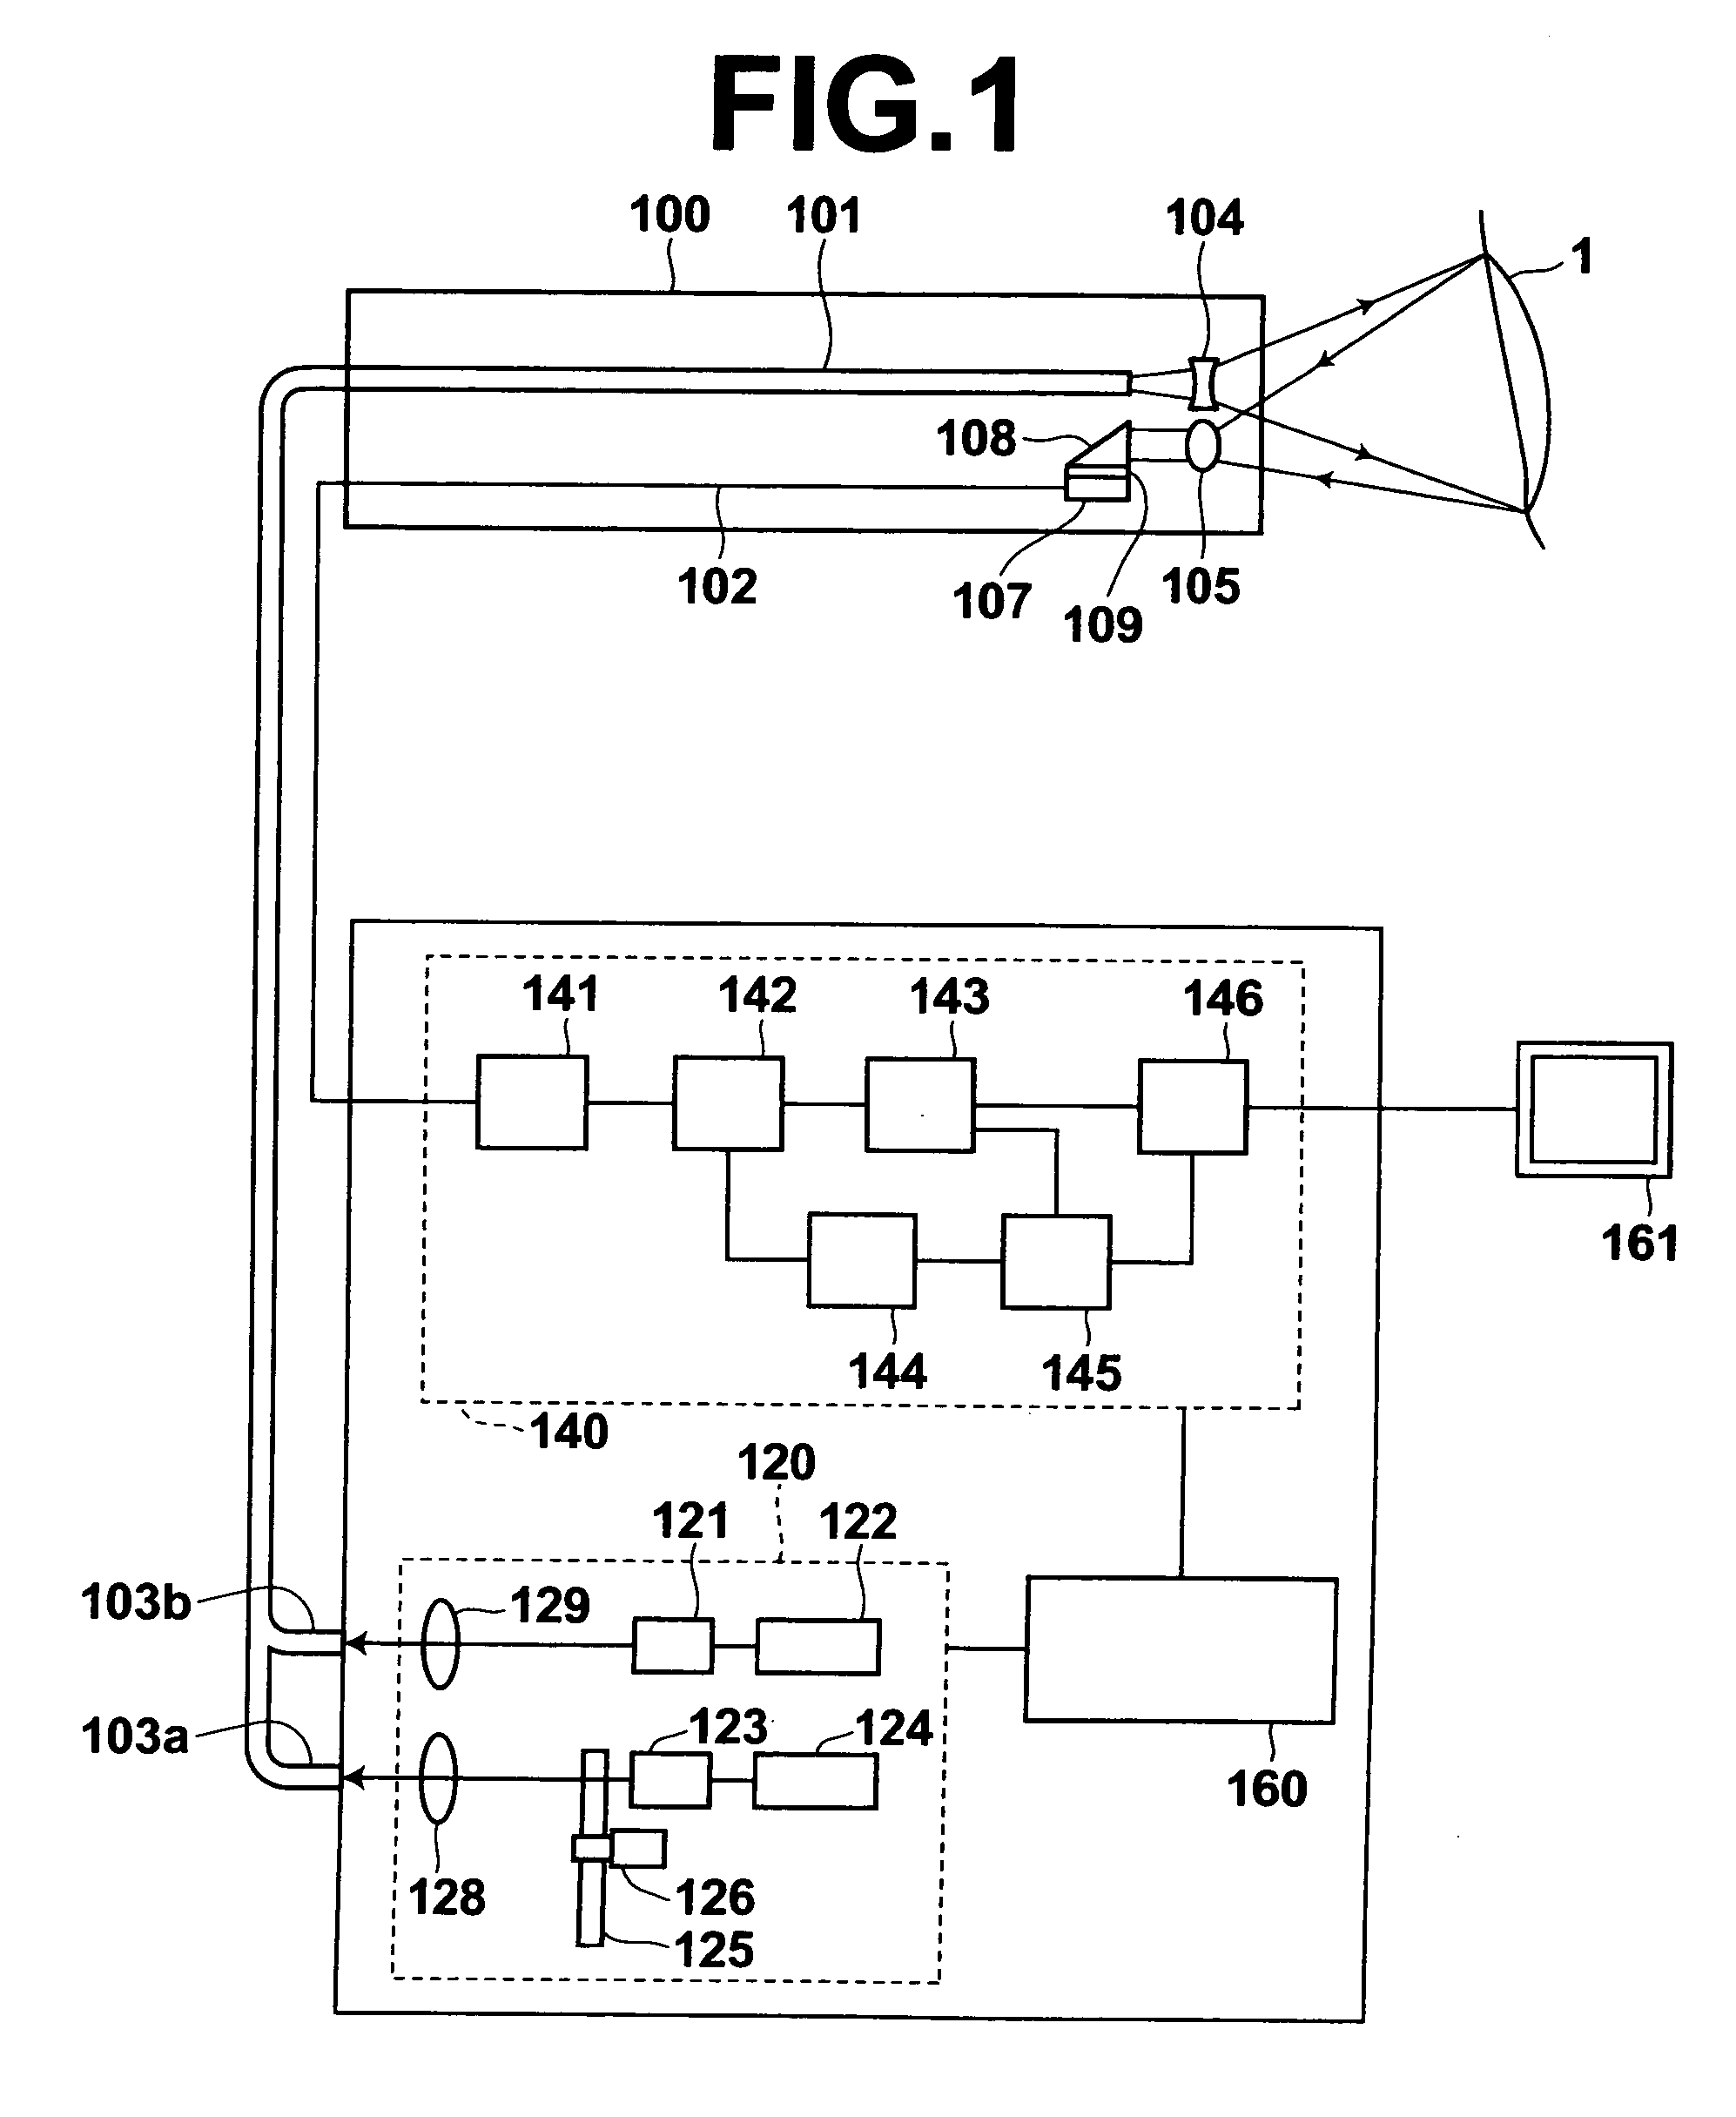 Fluorescence detecting system